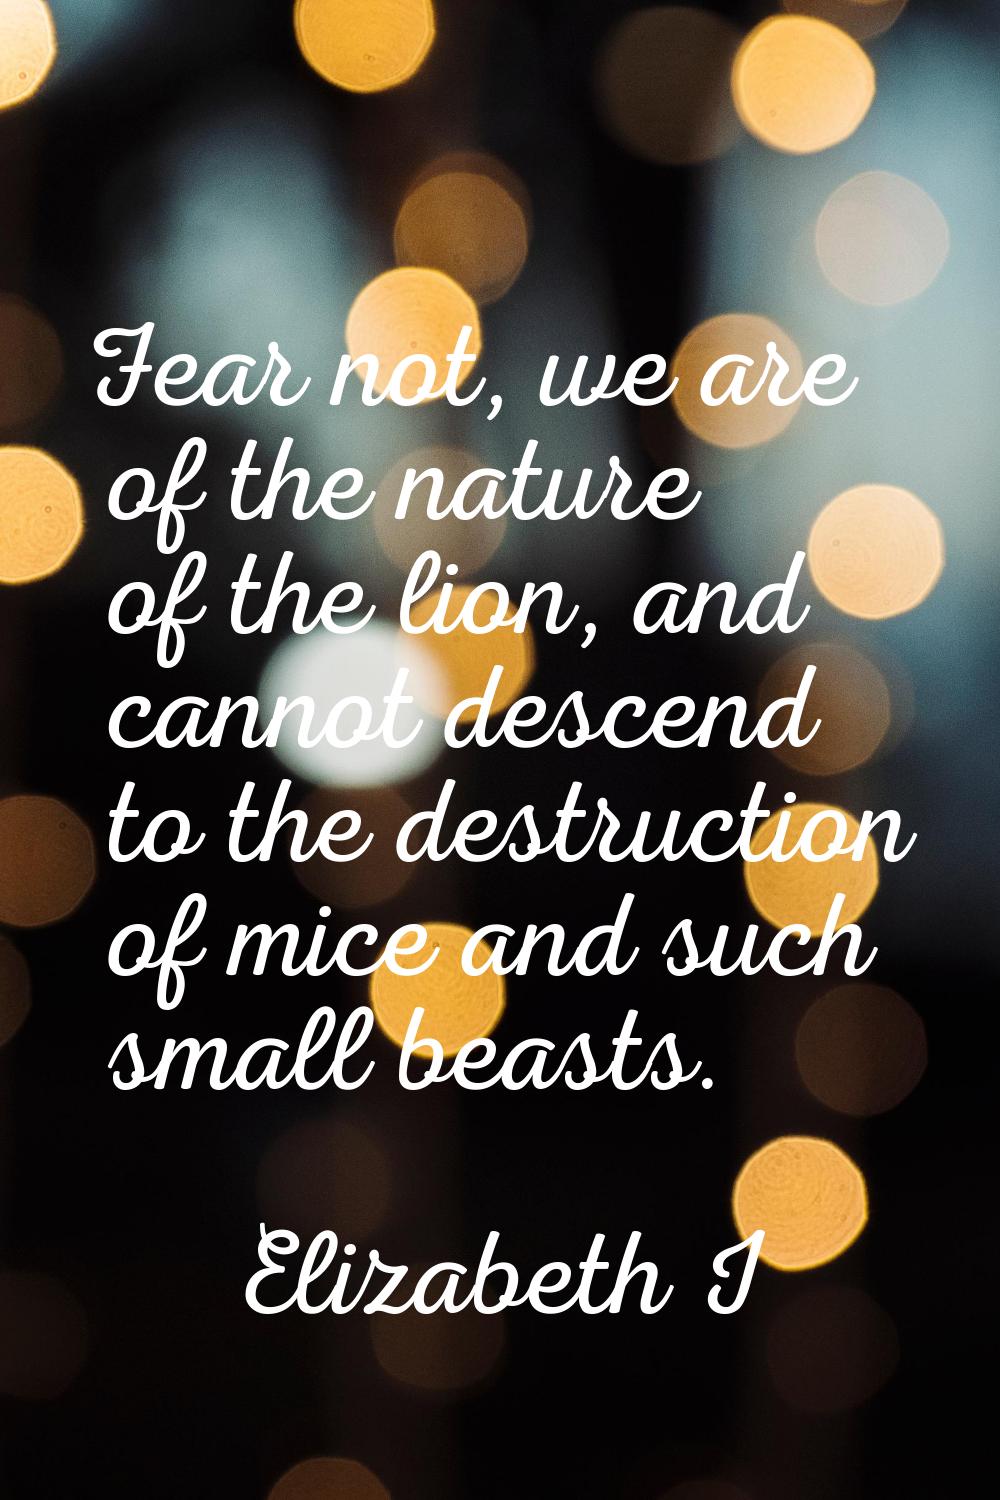 Fear not, we are of the nature of the lion, and cannot descend to the destruction of mice and such 